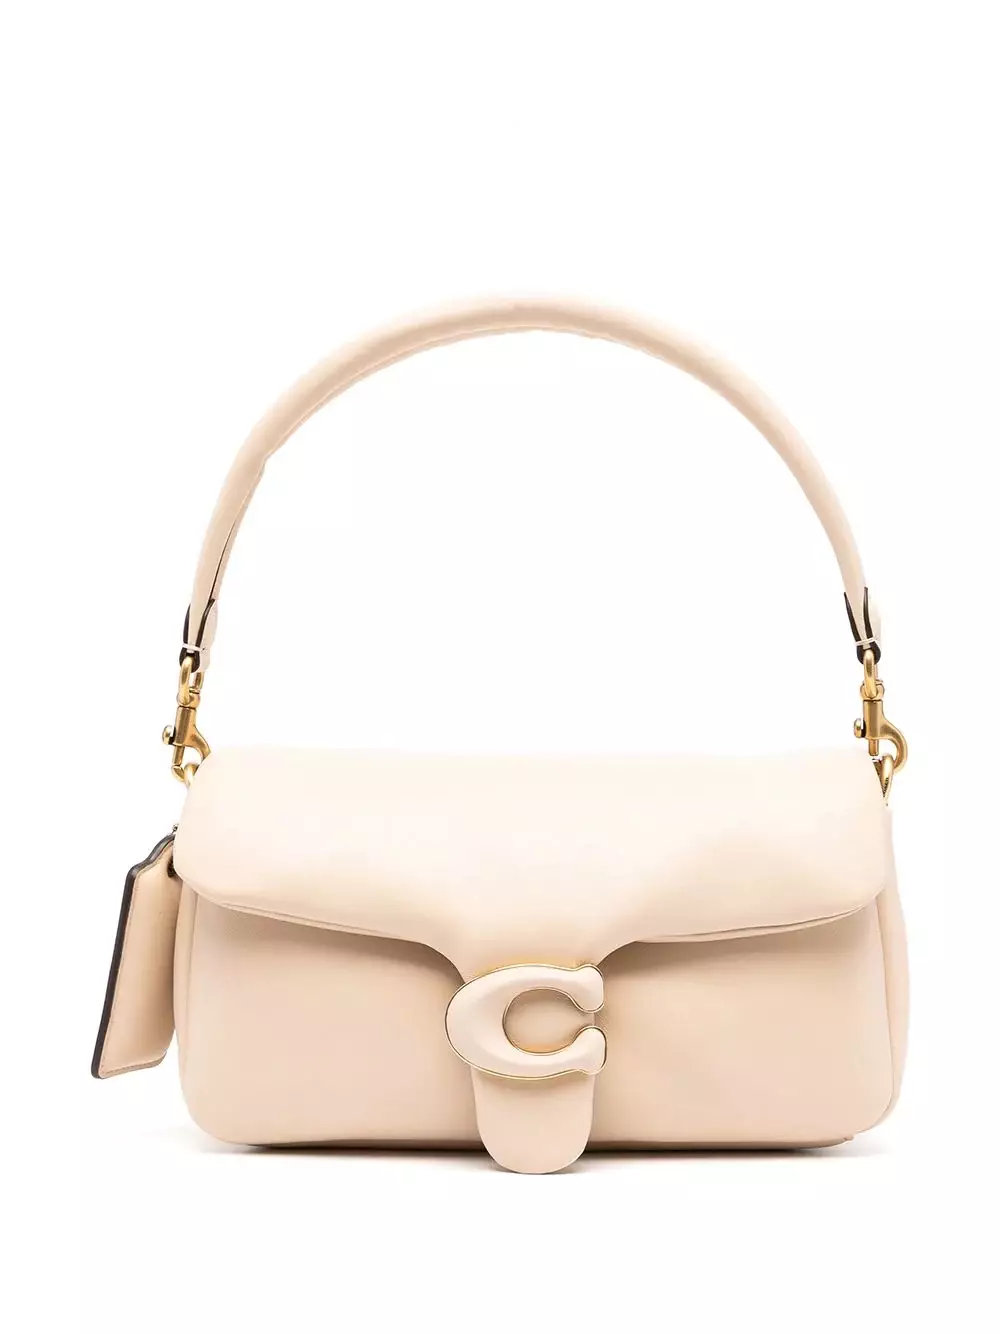 COACH Pillow Tabby 18 Small Ombre Nappa Leather Shoulder Bag